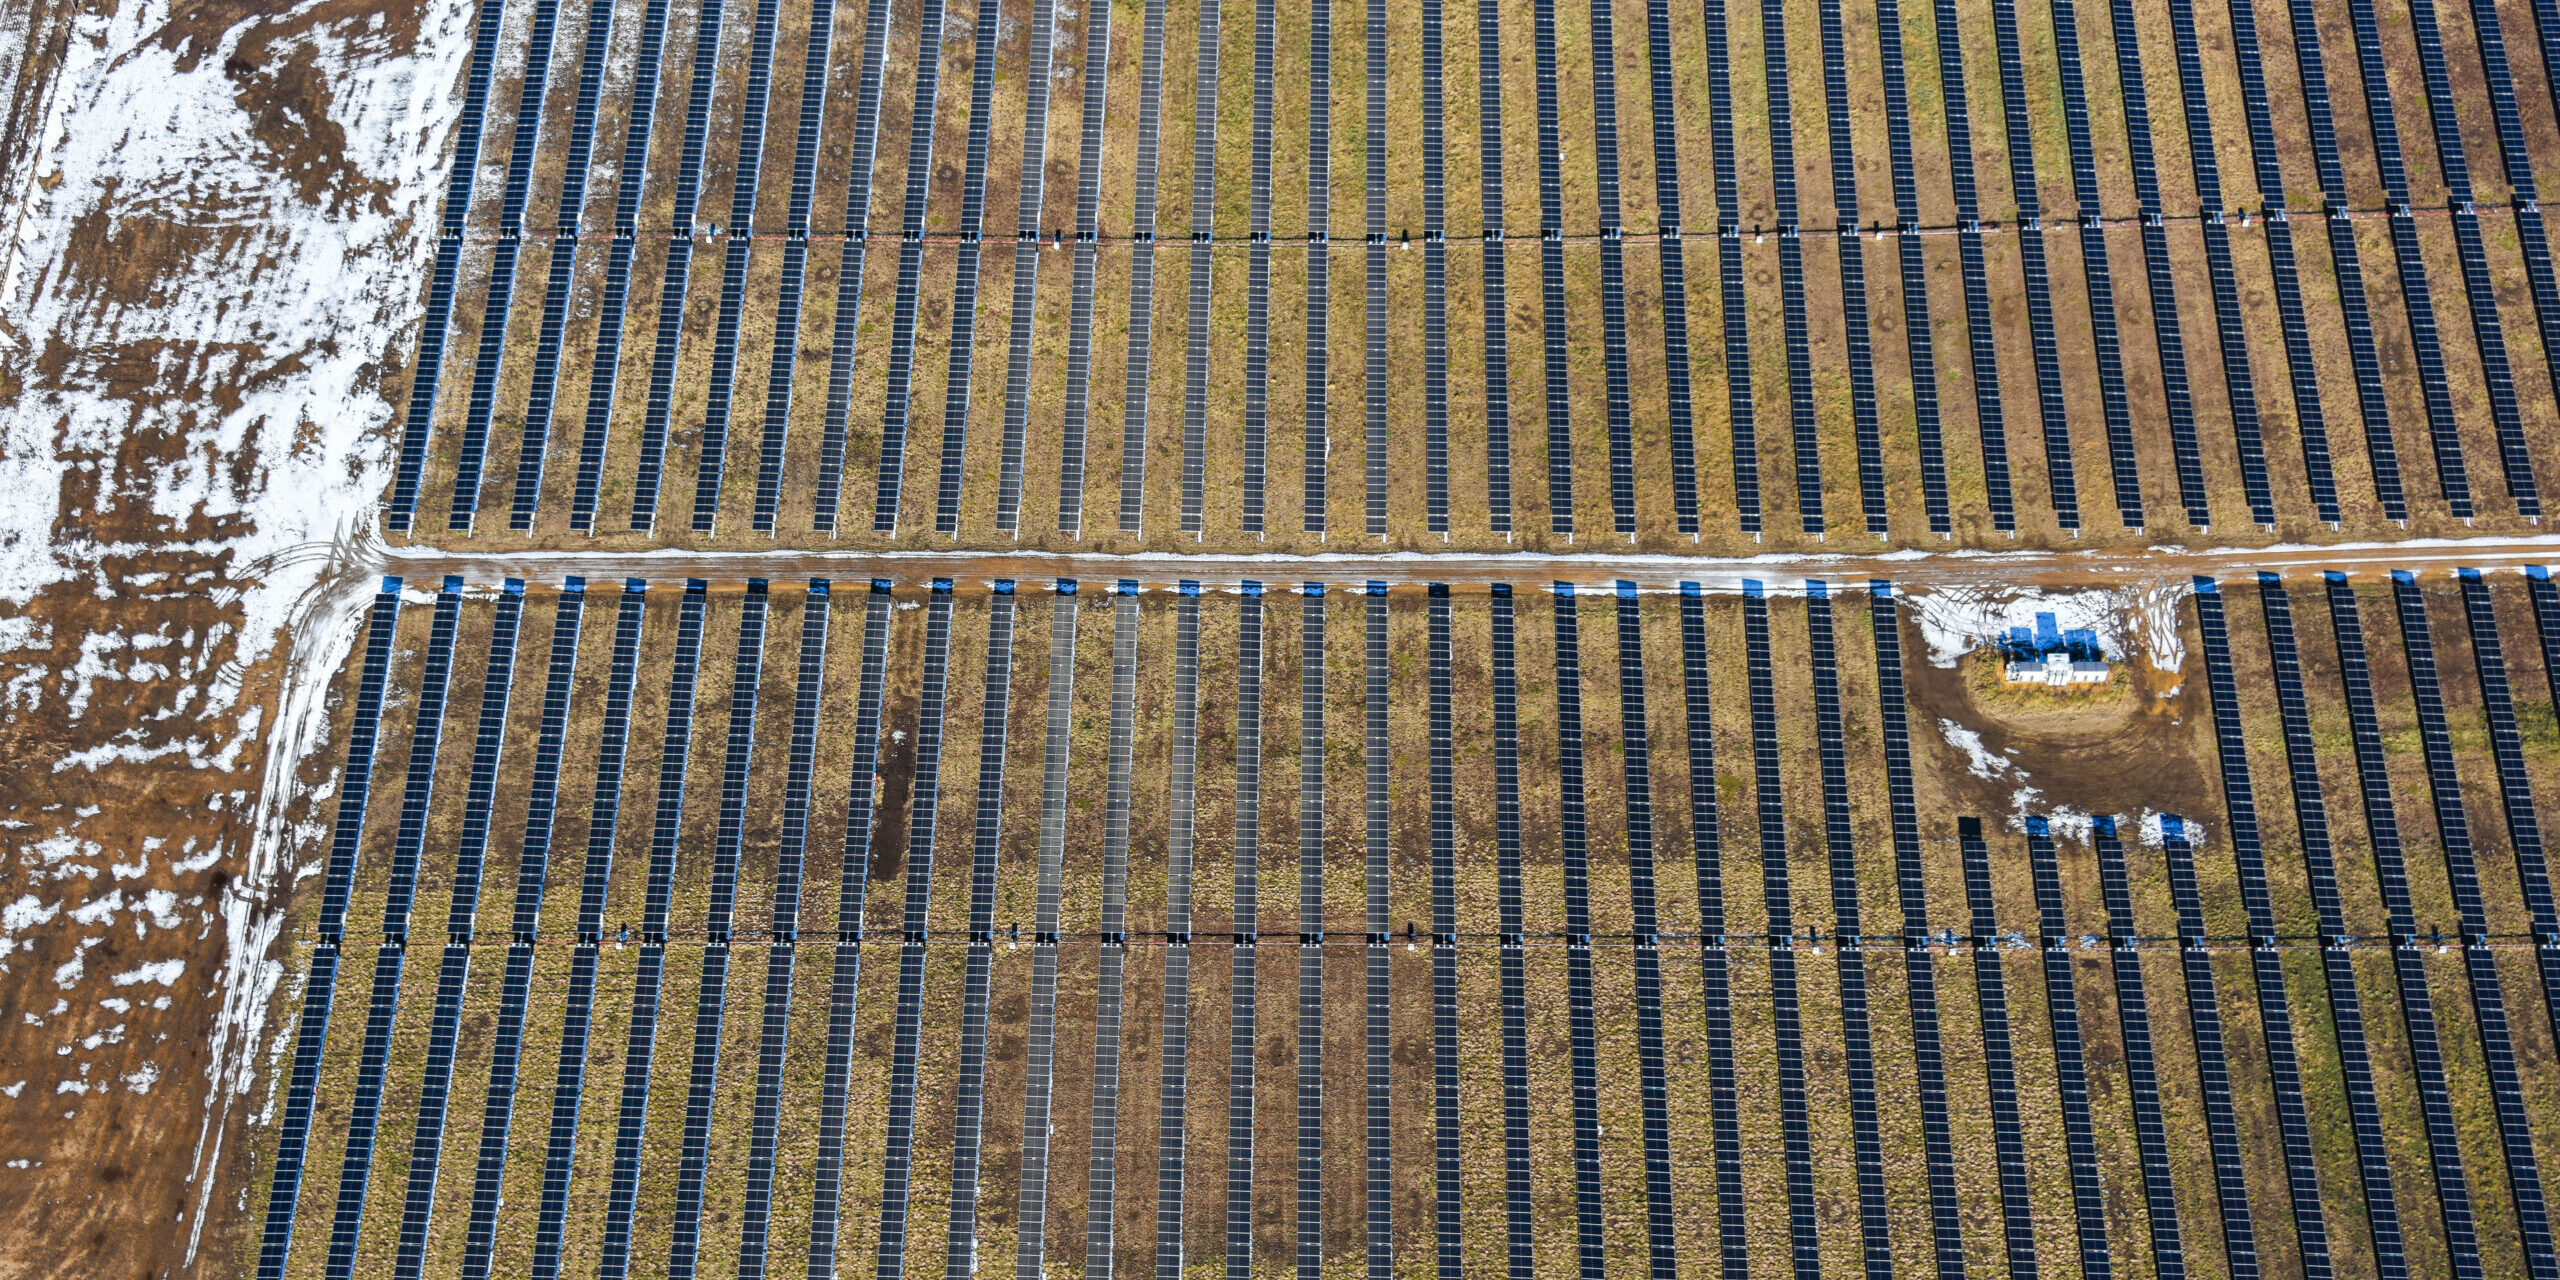 Overhead view of rows of solar panels in a rural field